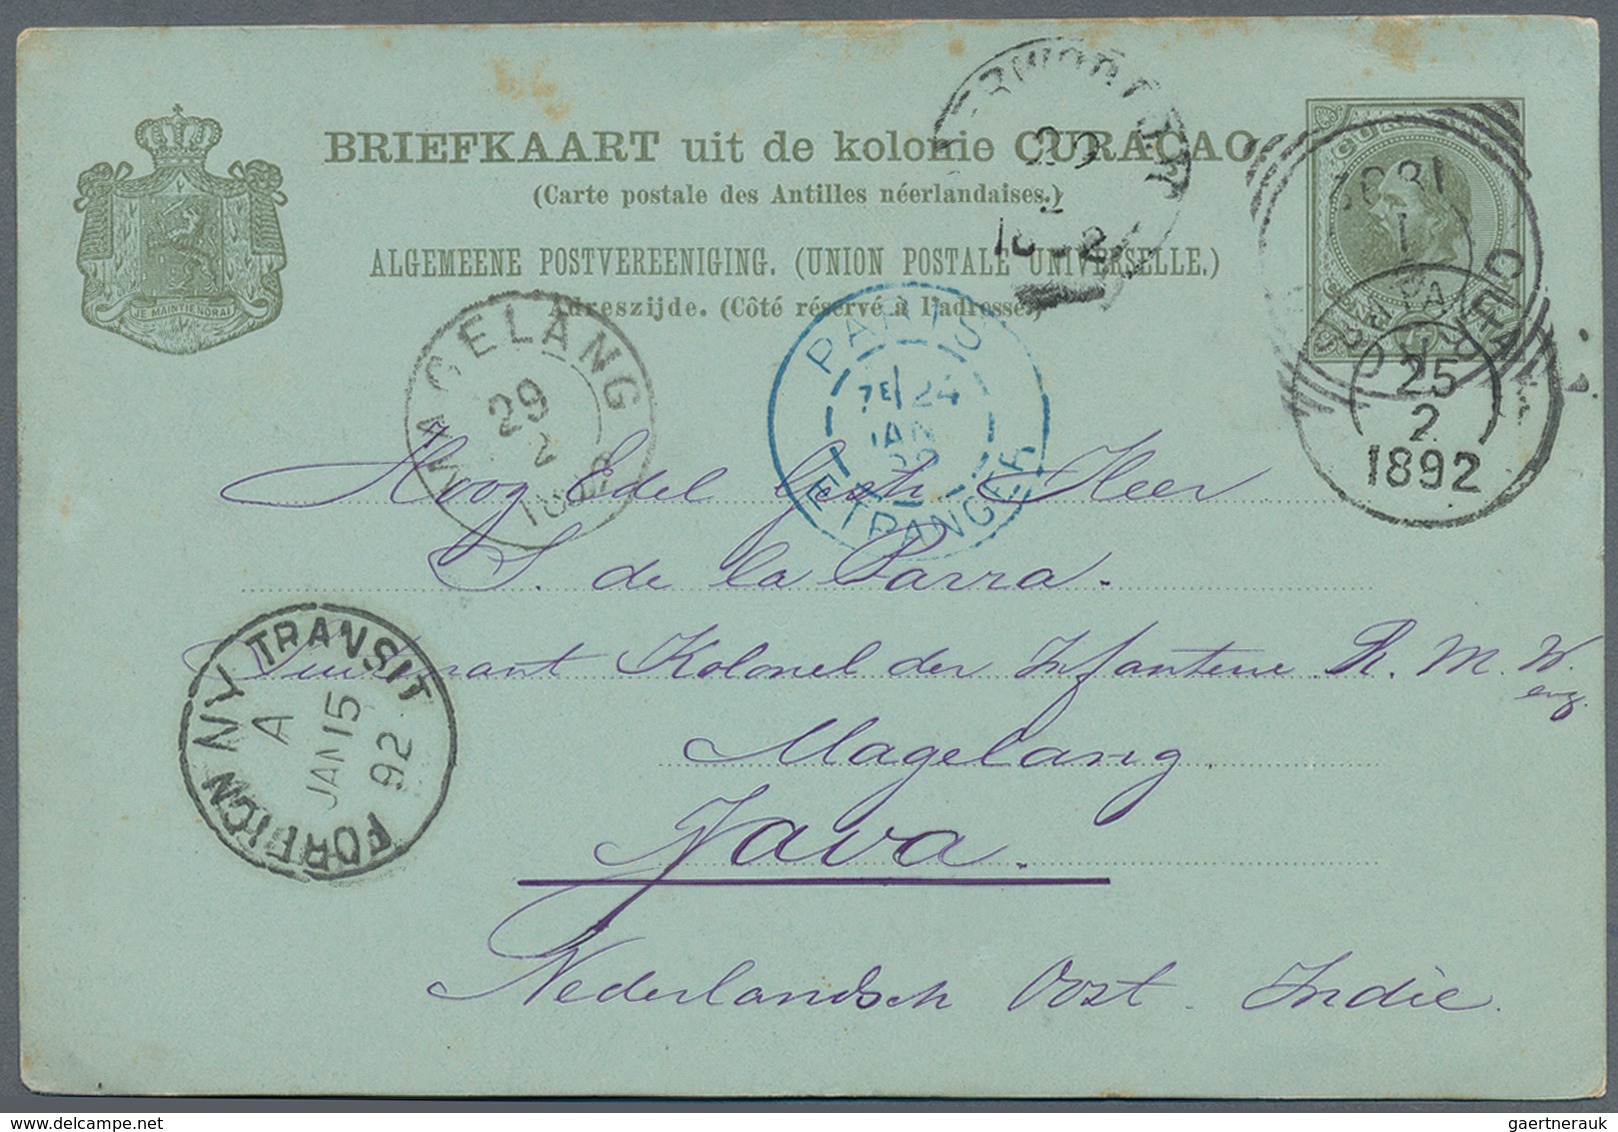 Curacao: 1891. Curacao Postal Stationery Card 7½c Olive Cancelled By Curacao Squared Circle '6th Jan - Curaçao, Nederlandse Antillen, Aruba